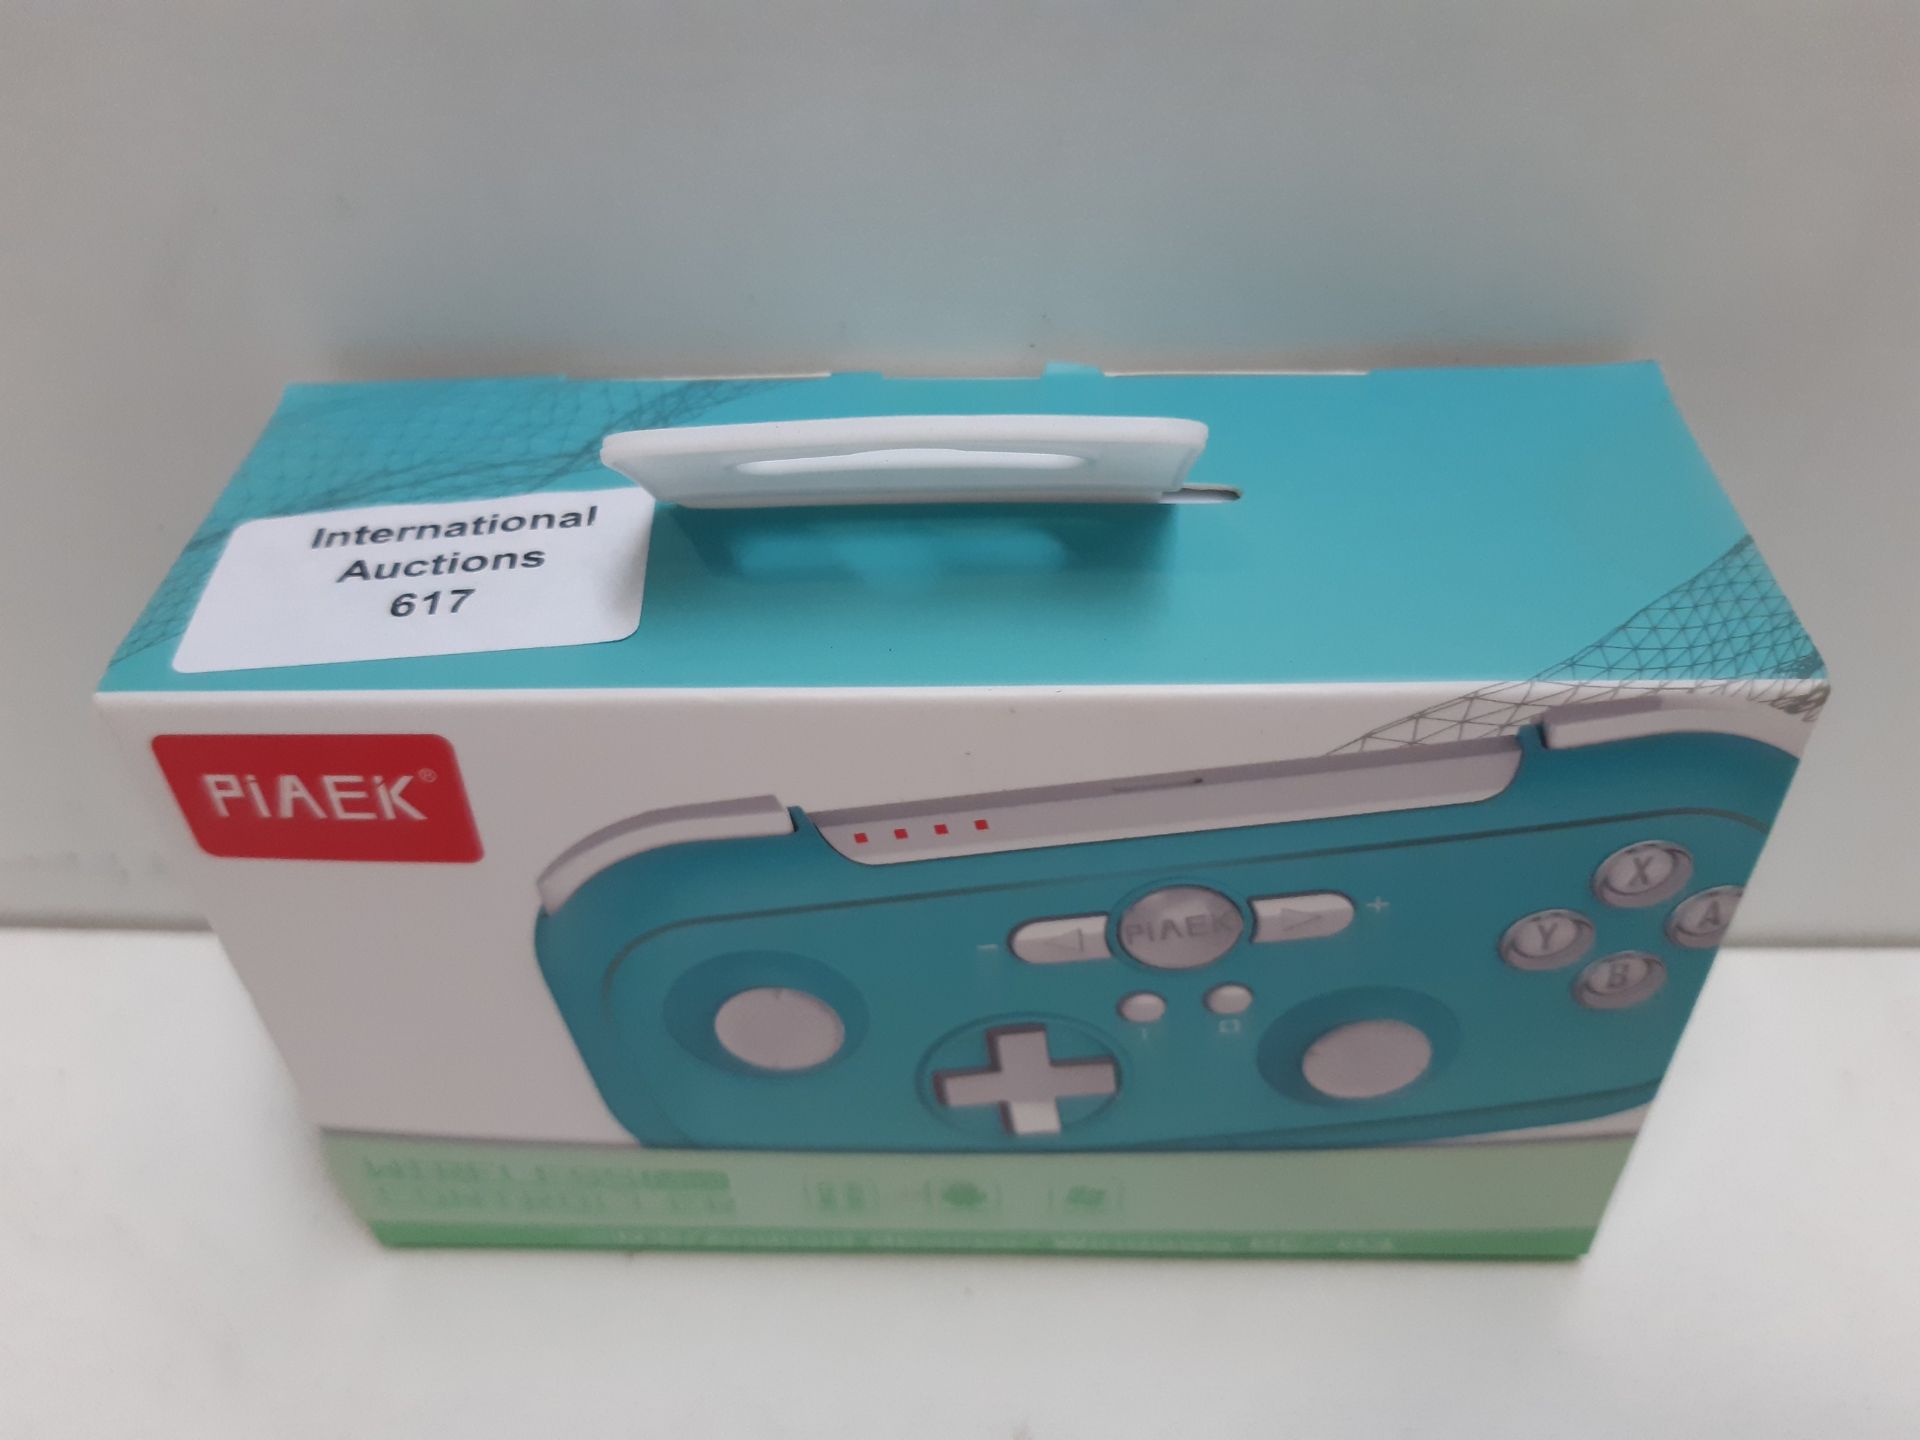 RRP £14.99 PiAEK Controller for Nintendo Switch 6-Axis sensor - Image 2 of 2